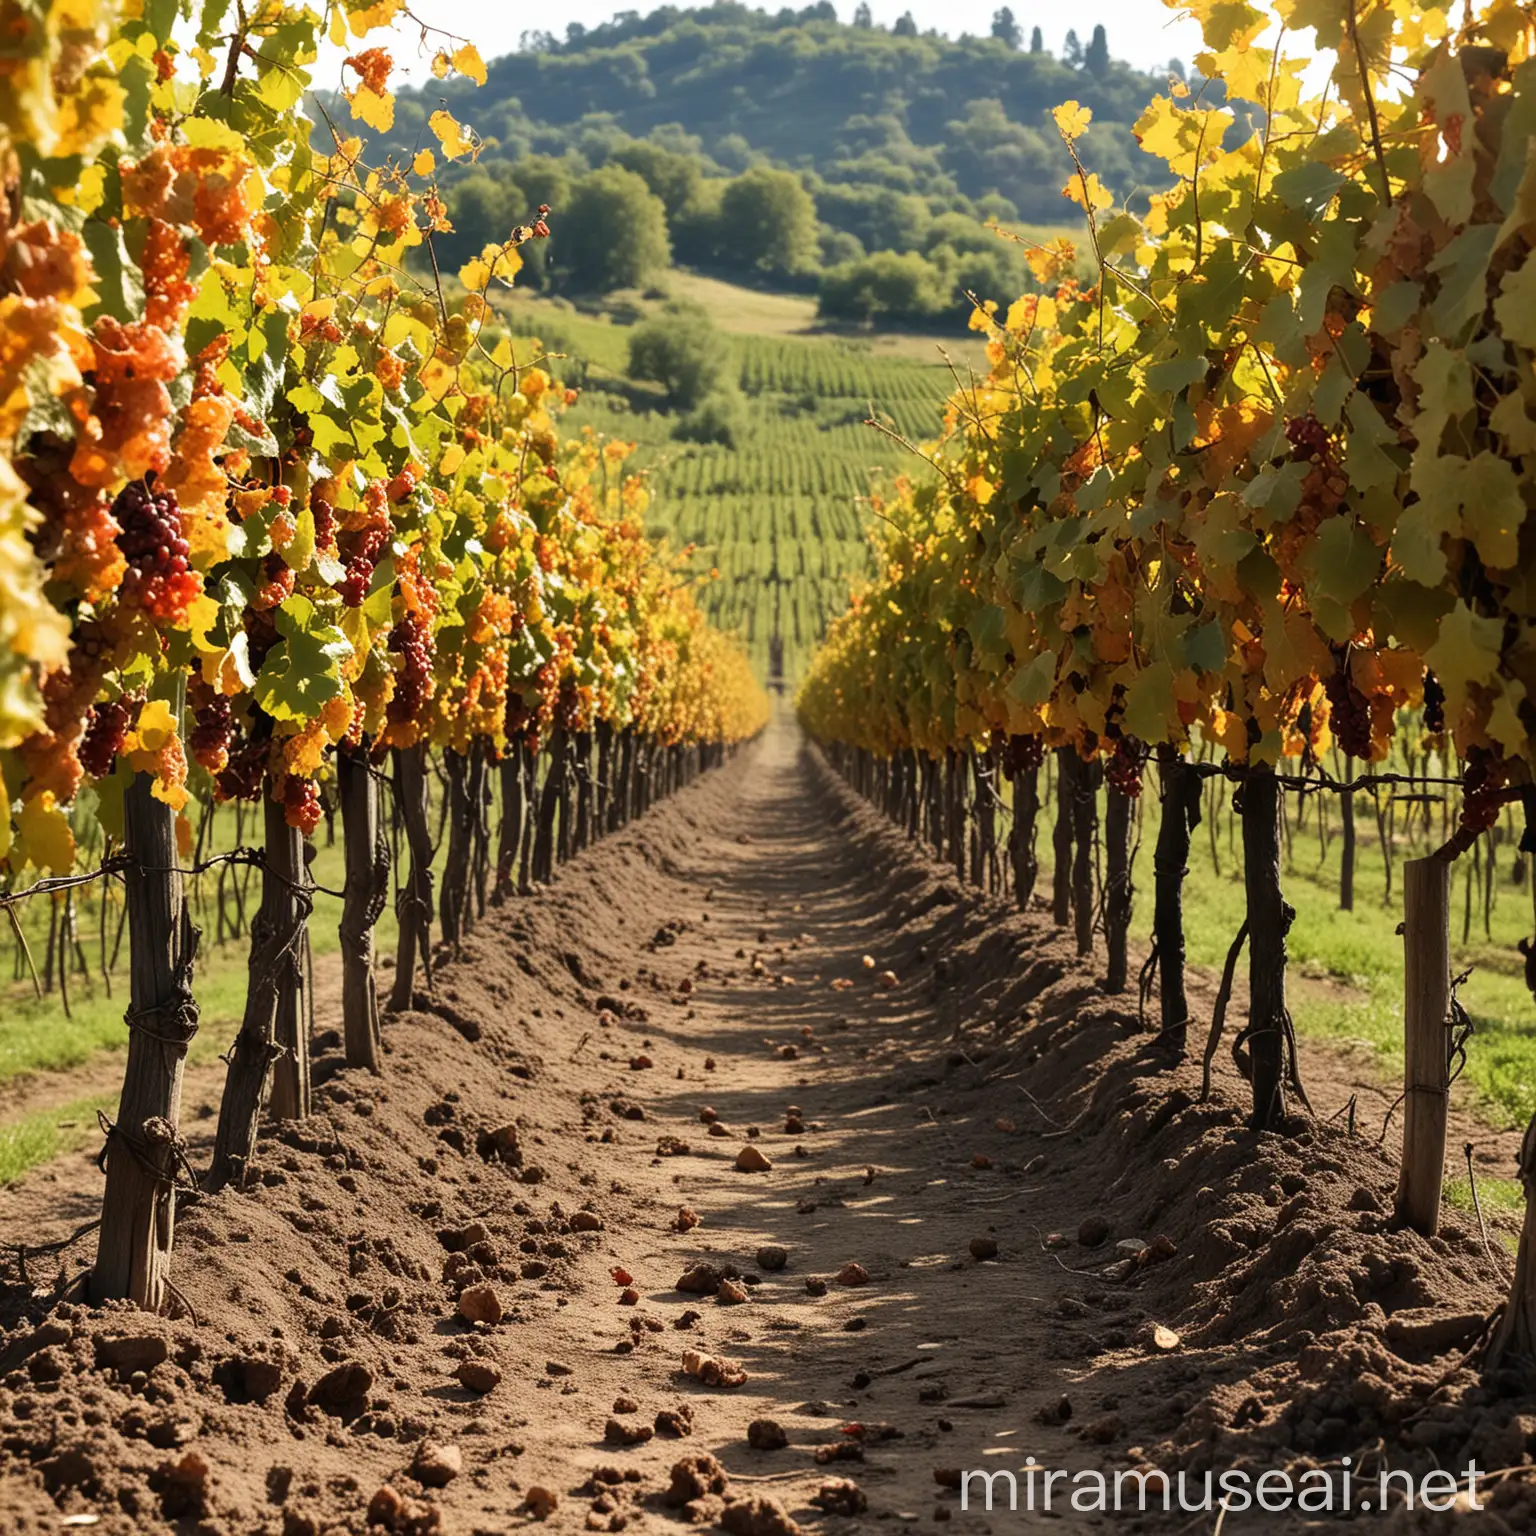 vineyards, being destroyed by bacteria, cured by biologicals